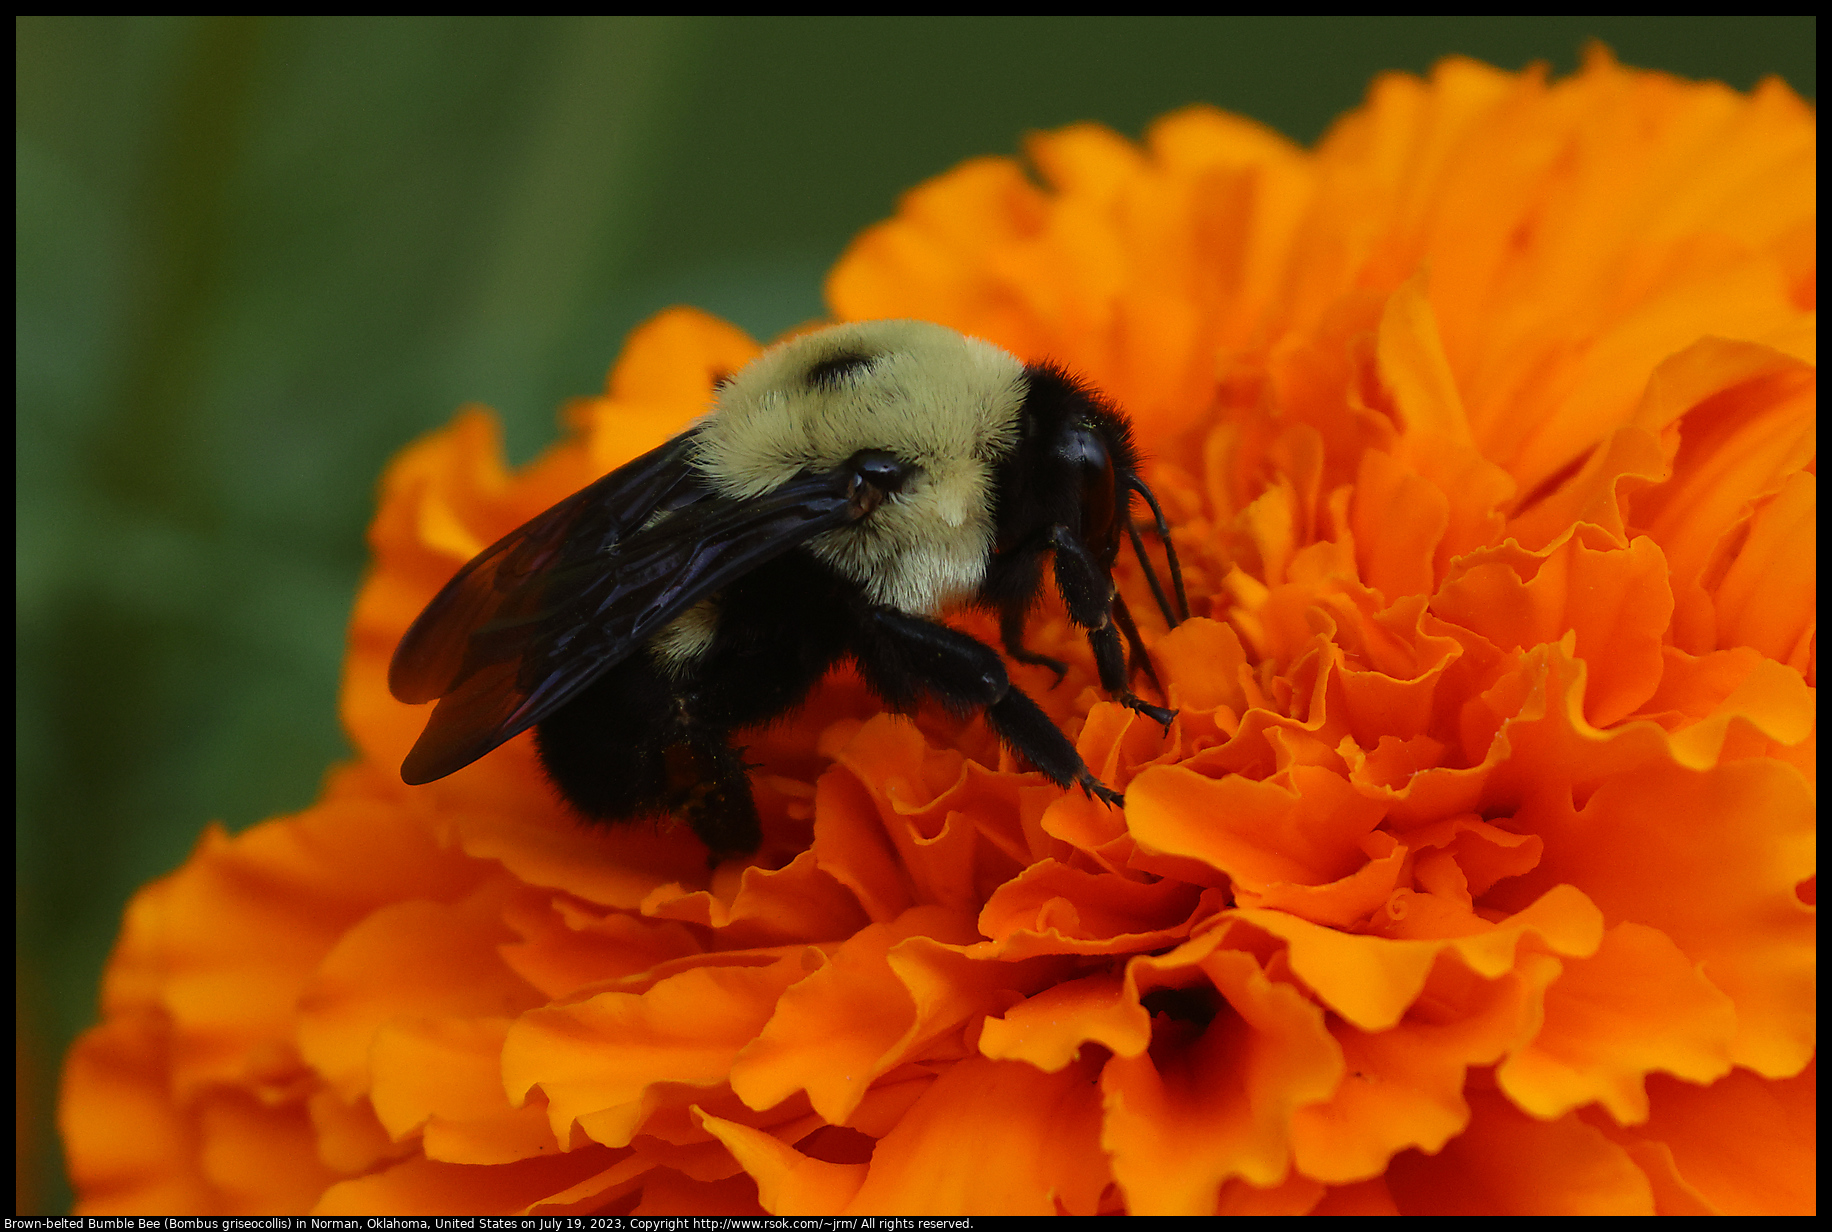 Brown-belted Bumble Bee (Bombus griseocollis) in Norman, Oklahoma, United States on July 19, 2023